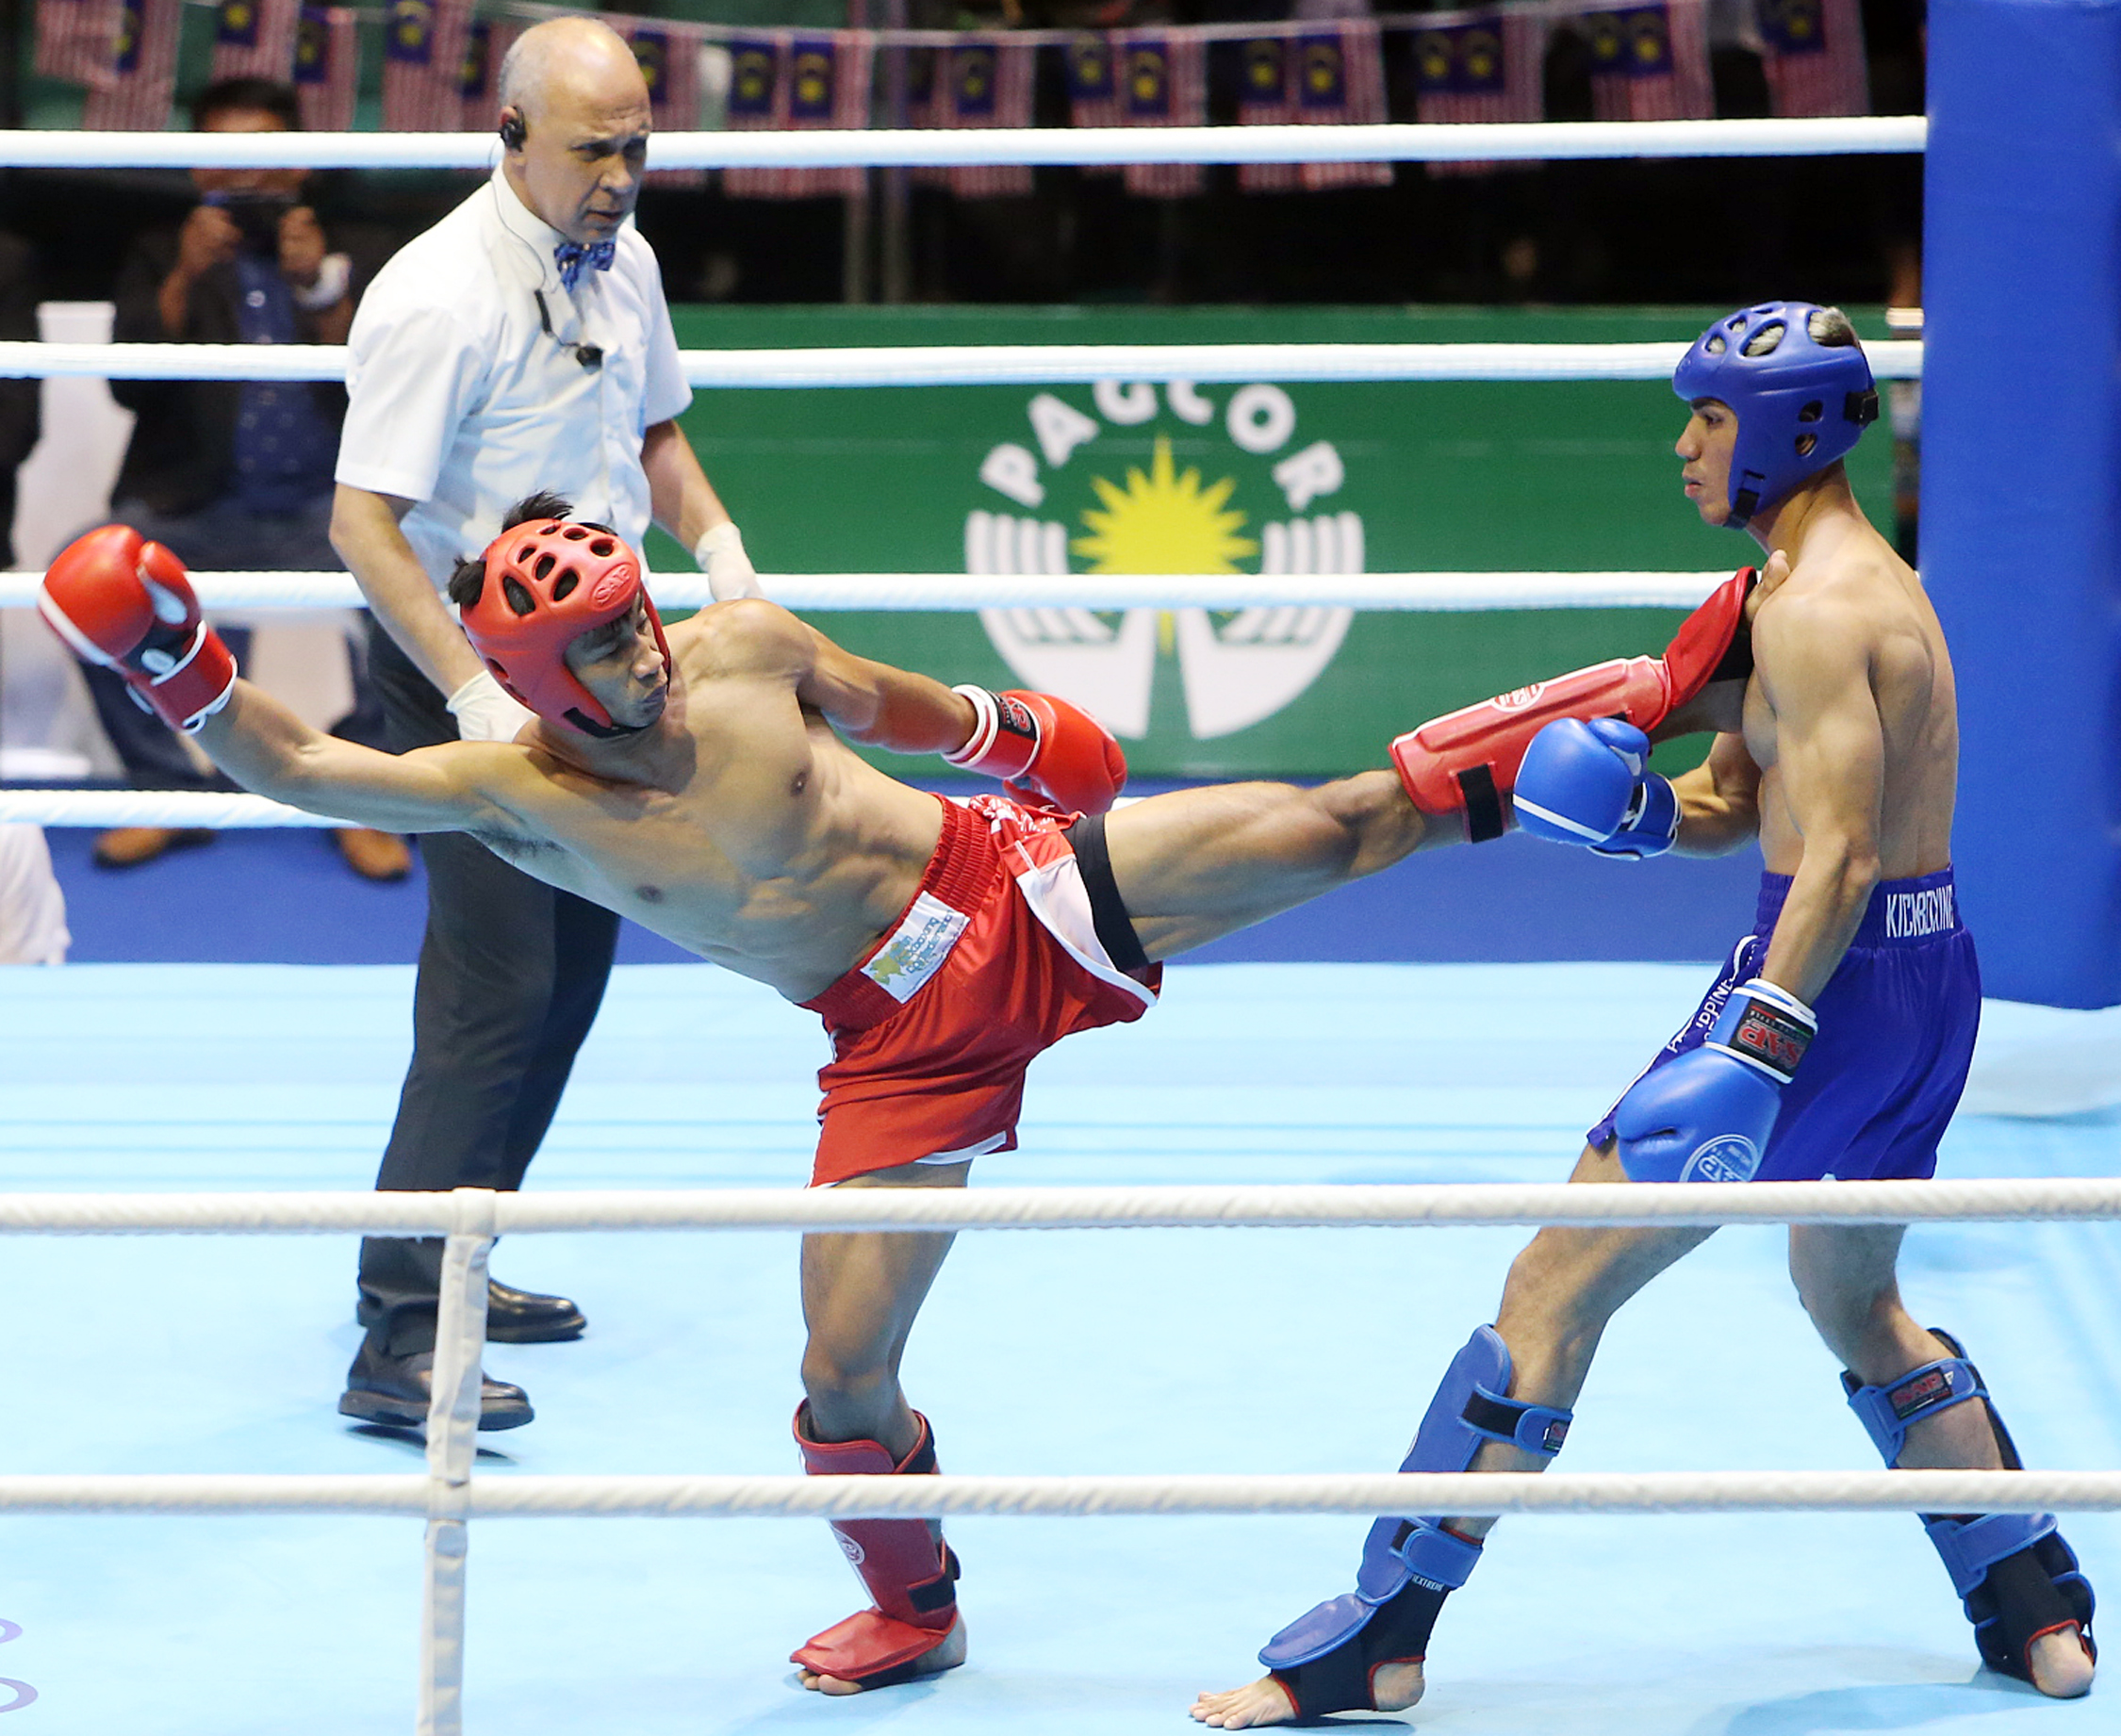 DECEMBER 10, 2019Jean Calude Saclag of the Philippines (red) connects a left side kick to the chest of his opponent from Malaysia Mohammad Mahmoud (blue) duirng the fight in the Kickboxing match held at Cuneta Astrodome. Saclag went on to win the Gold medal.
EDWIN BACASMAS